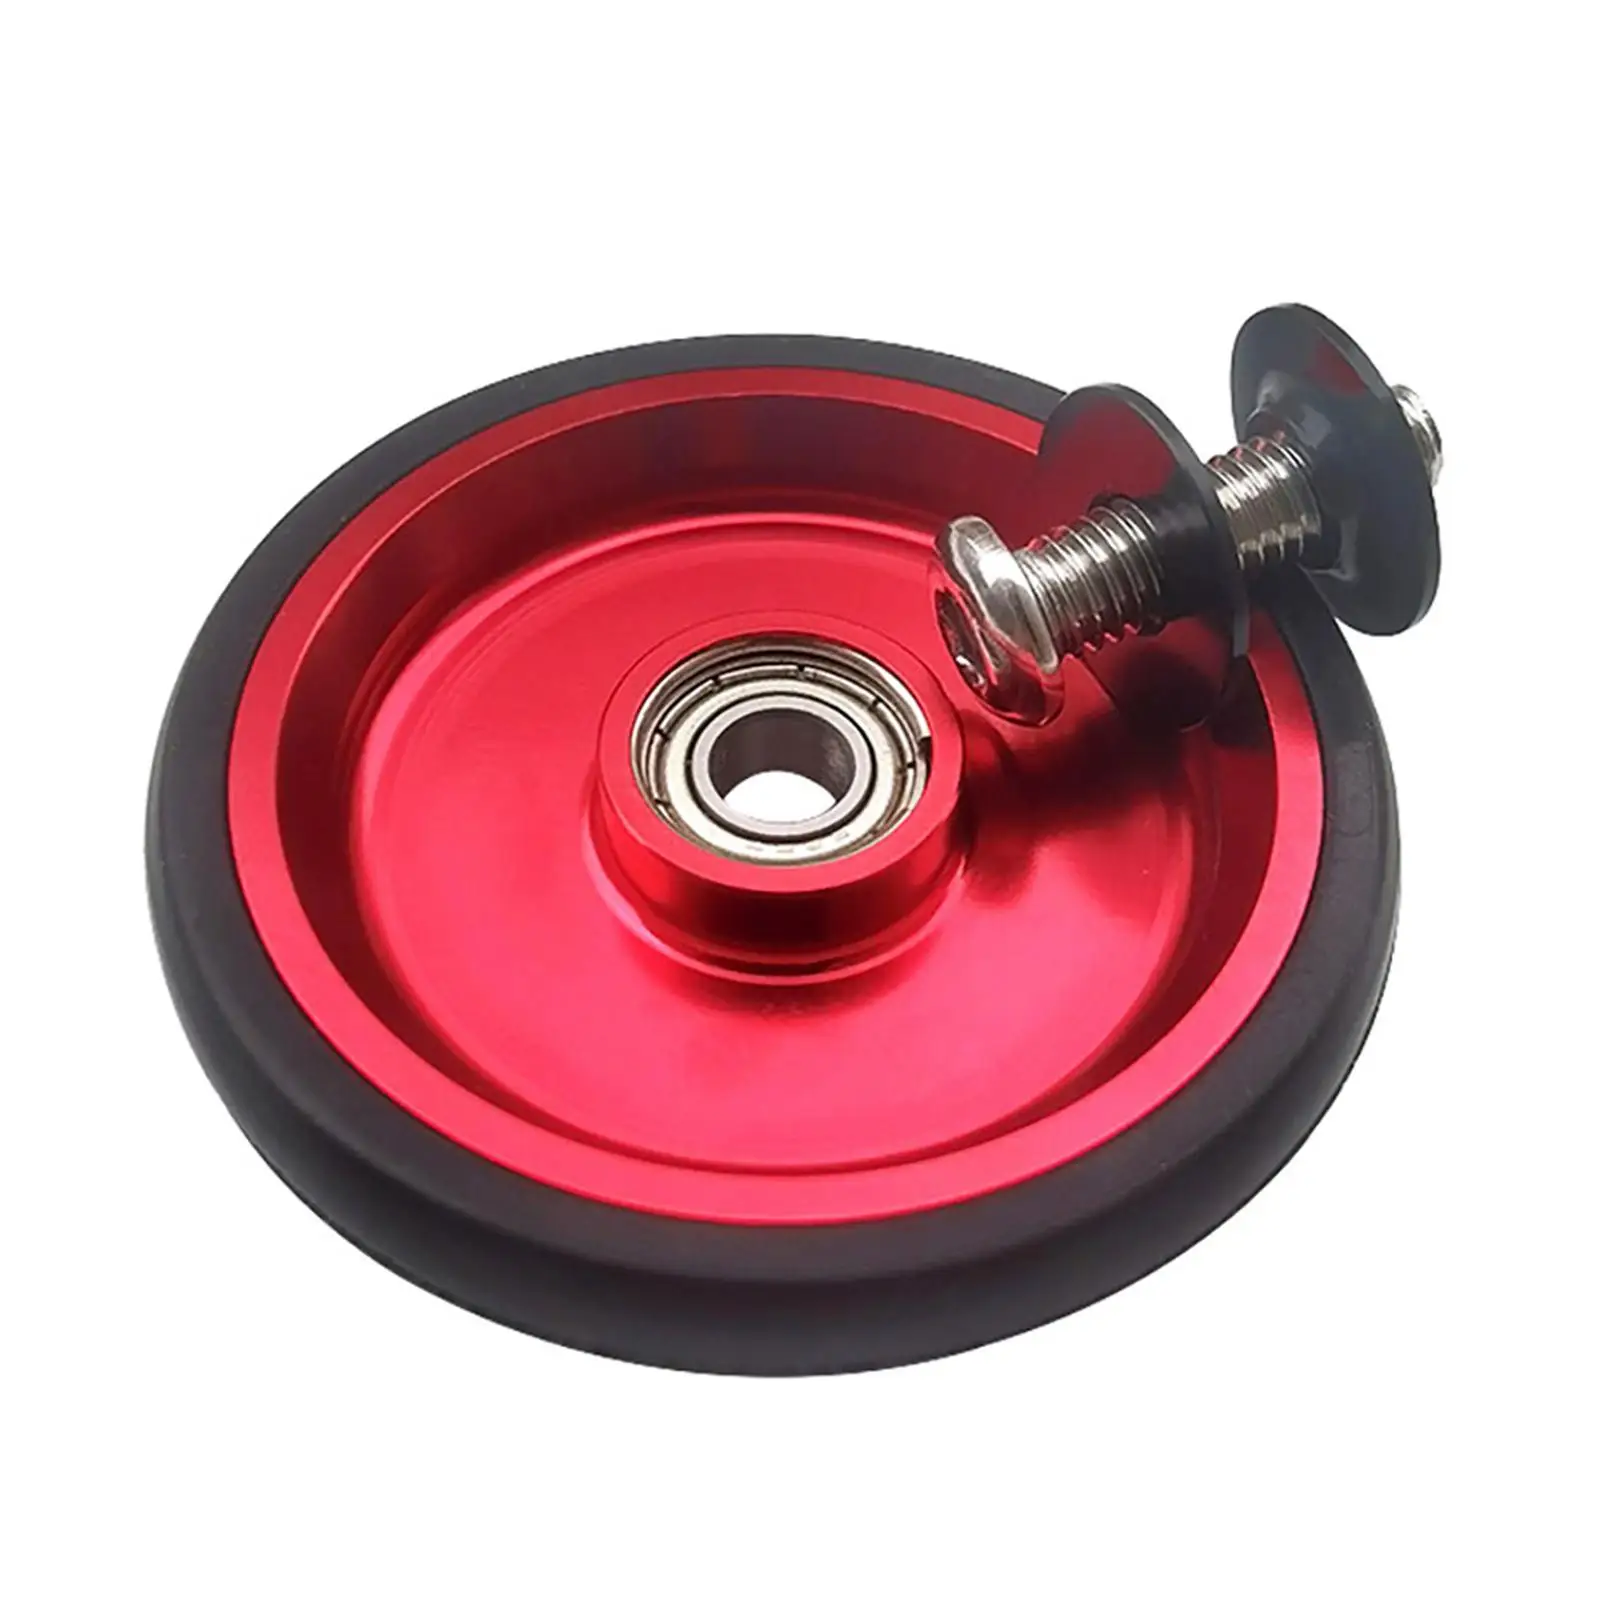 Tire for Folding Bike Wheel Easywheel Tire Spare Parts Rubber Ring Tyre